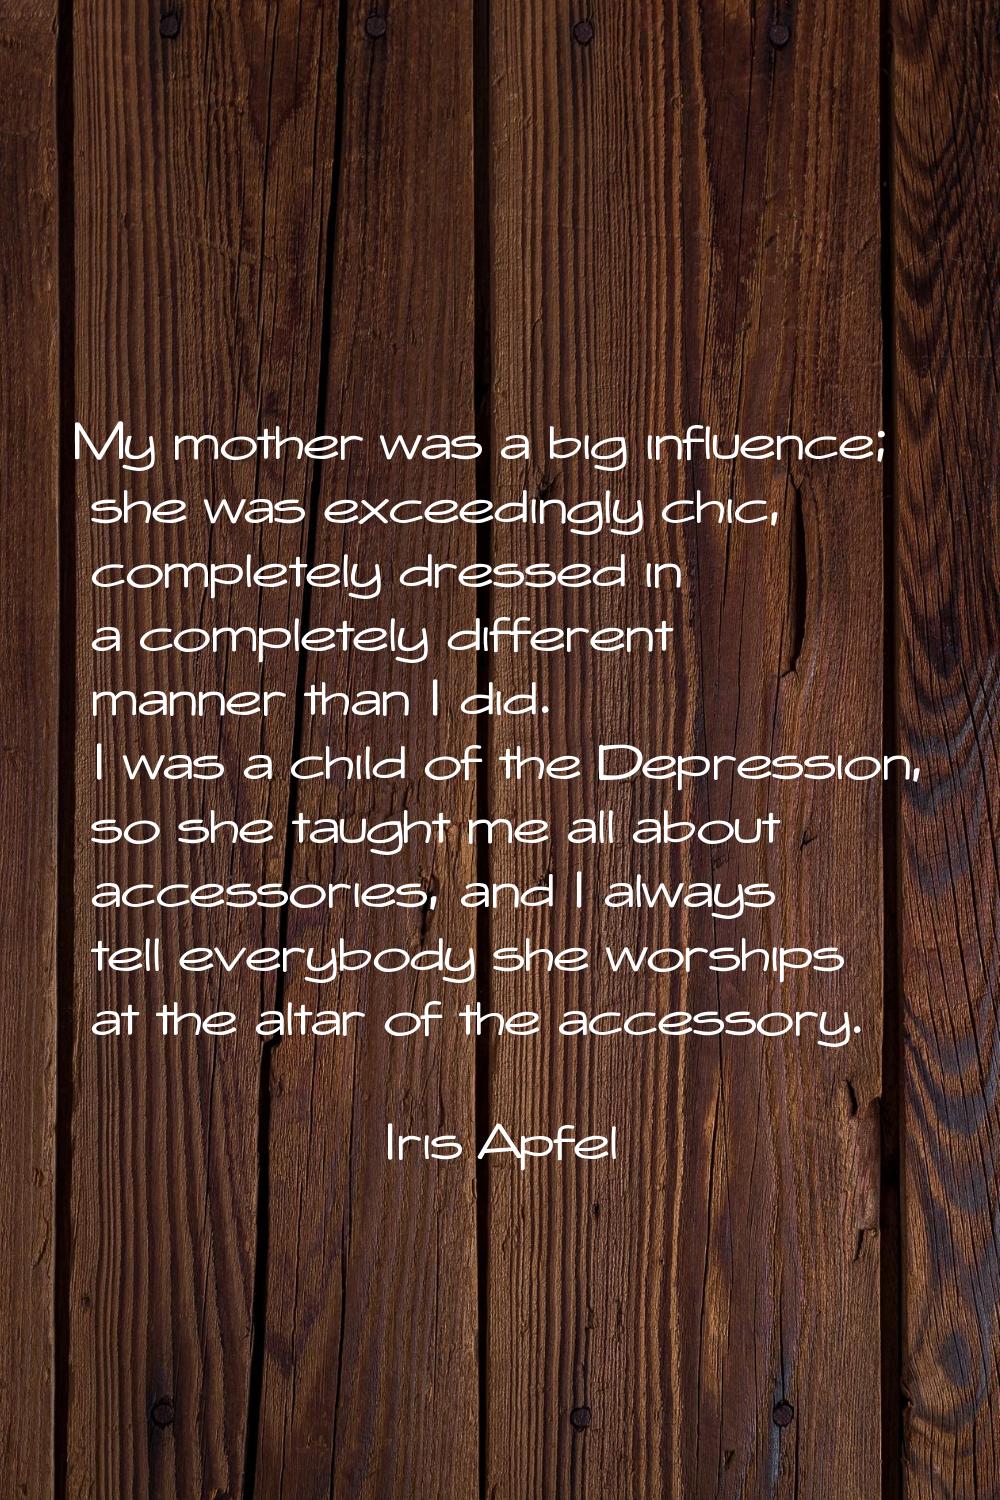 My mother was a big influence; she was exceedingly chic, completely dressed in a completely differe